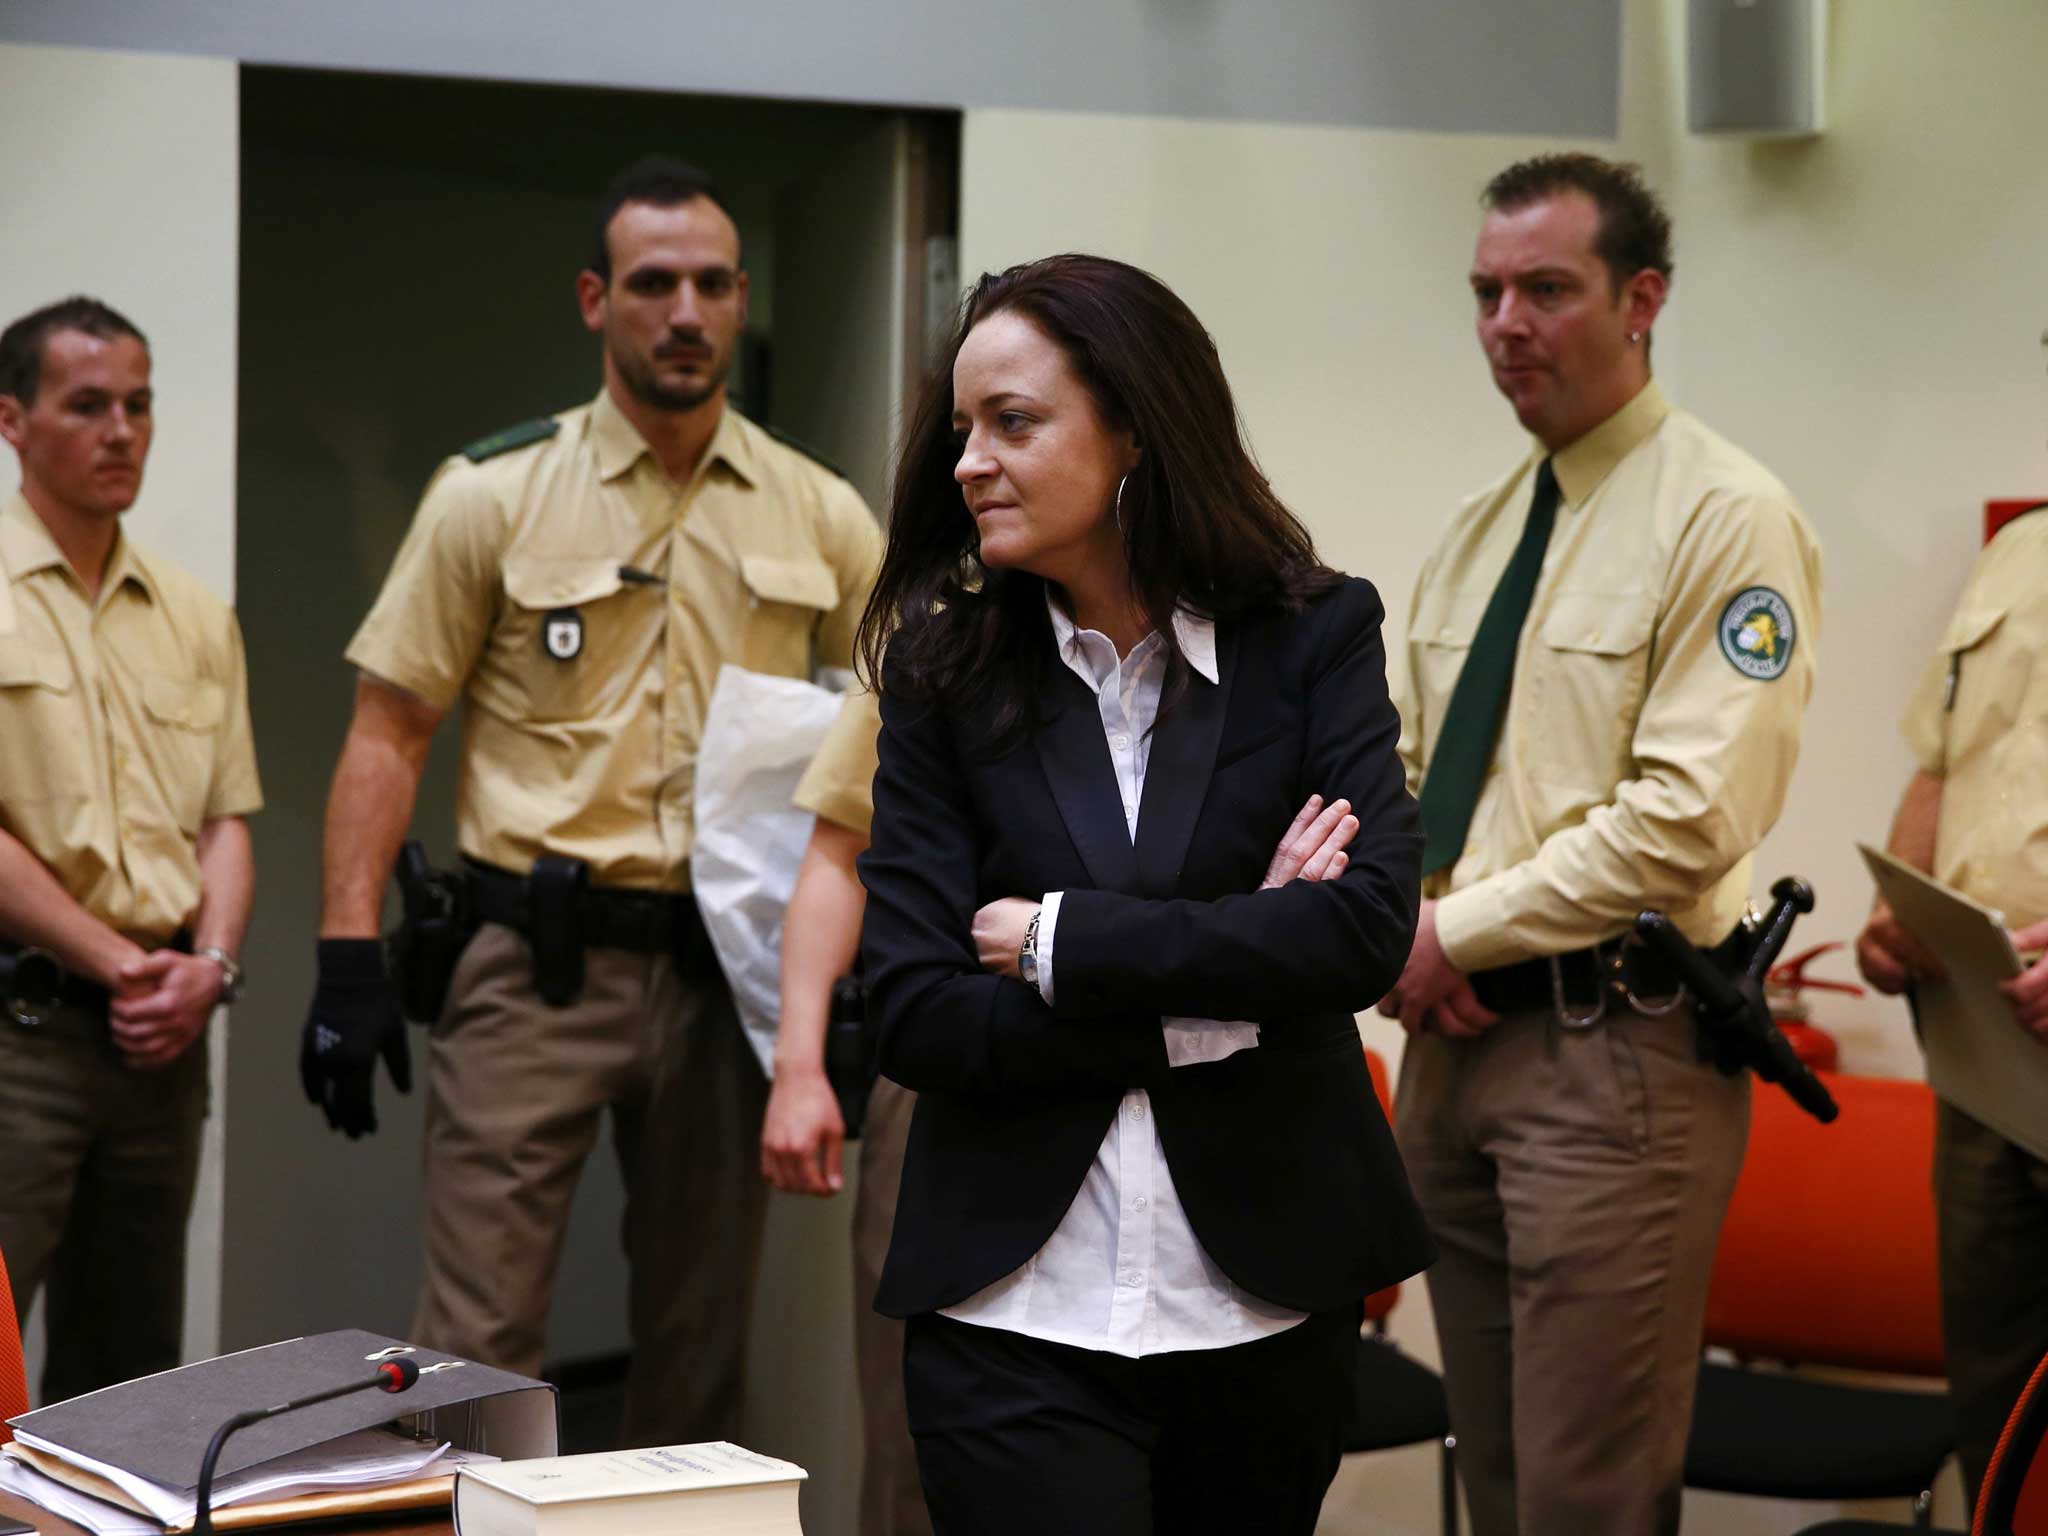 Beate Zschaepe, a member of the neo-Nazi group National Socialist Underground (NSU) stands in the court before the start of her trial